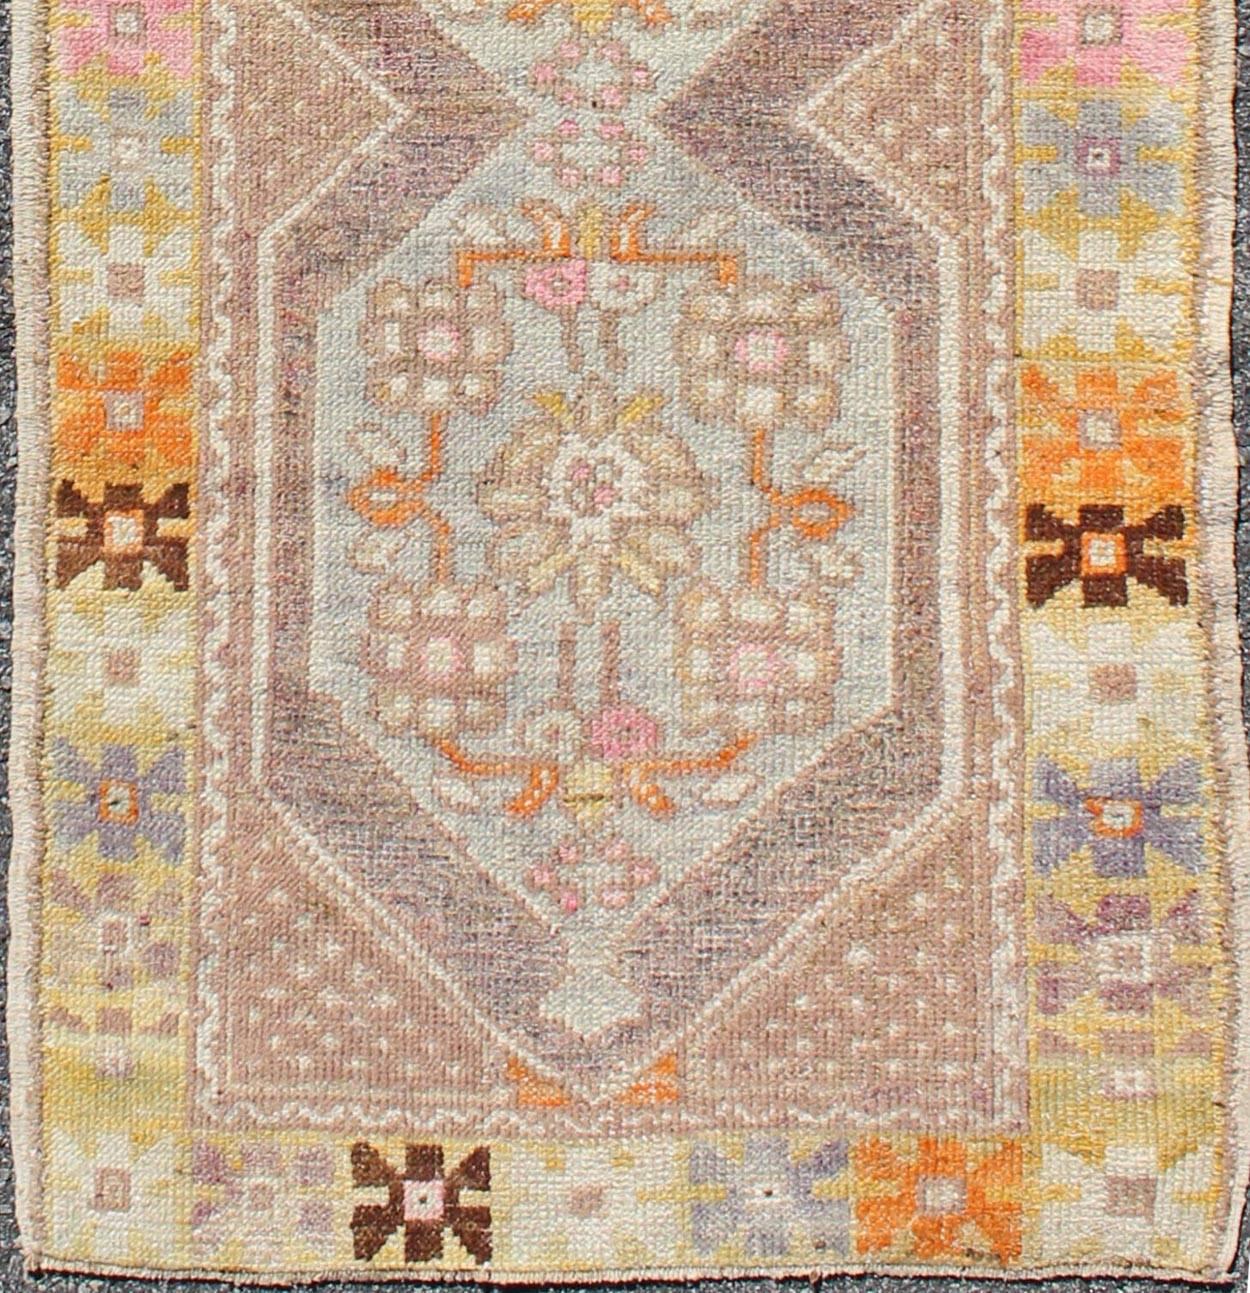 This beautifully colored Oushak rug contains subtle tones of lavender, coral, taupe, brown, beige, orange, pink, soft gold, light blue and green, which are highlighted by chocolate and mocha colors. The stylized geometric medallions accentuate a